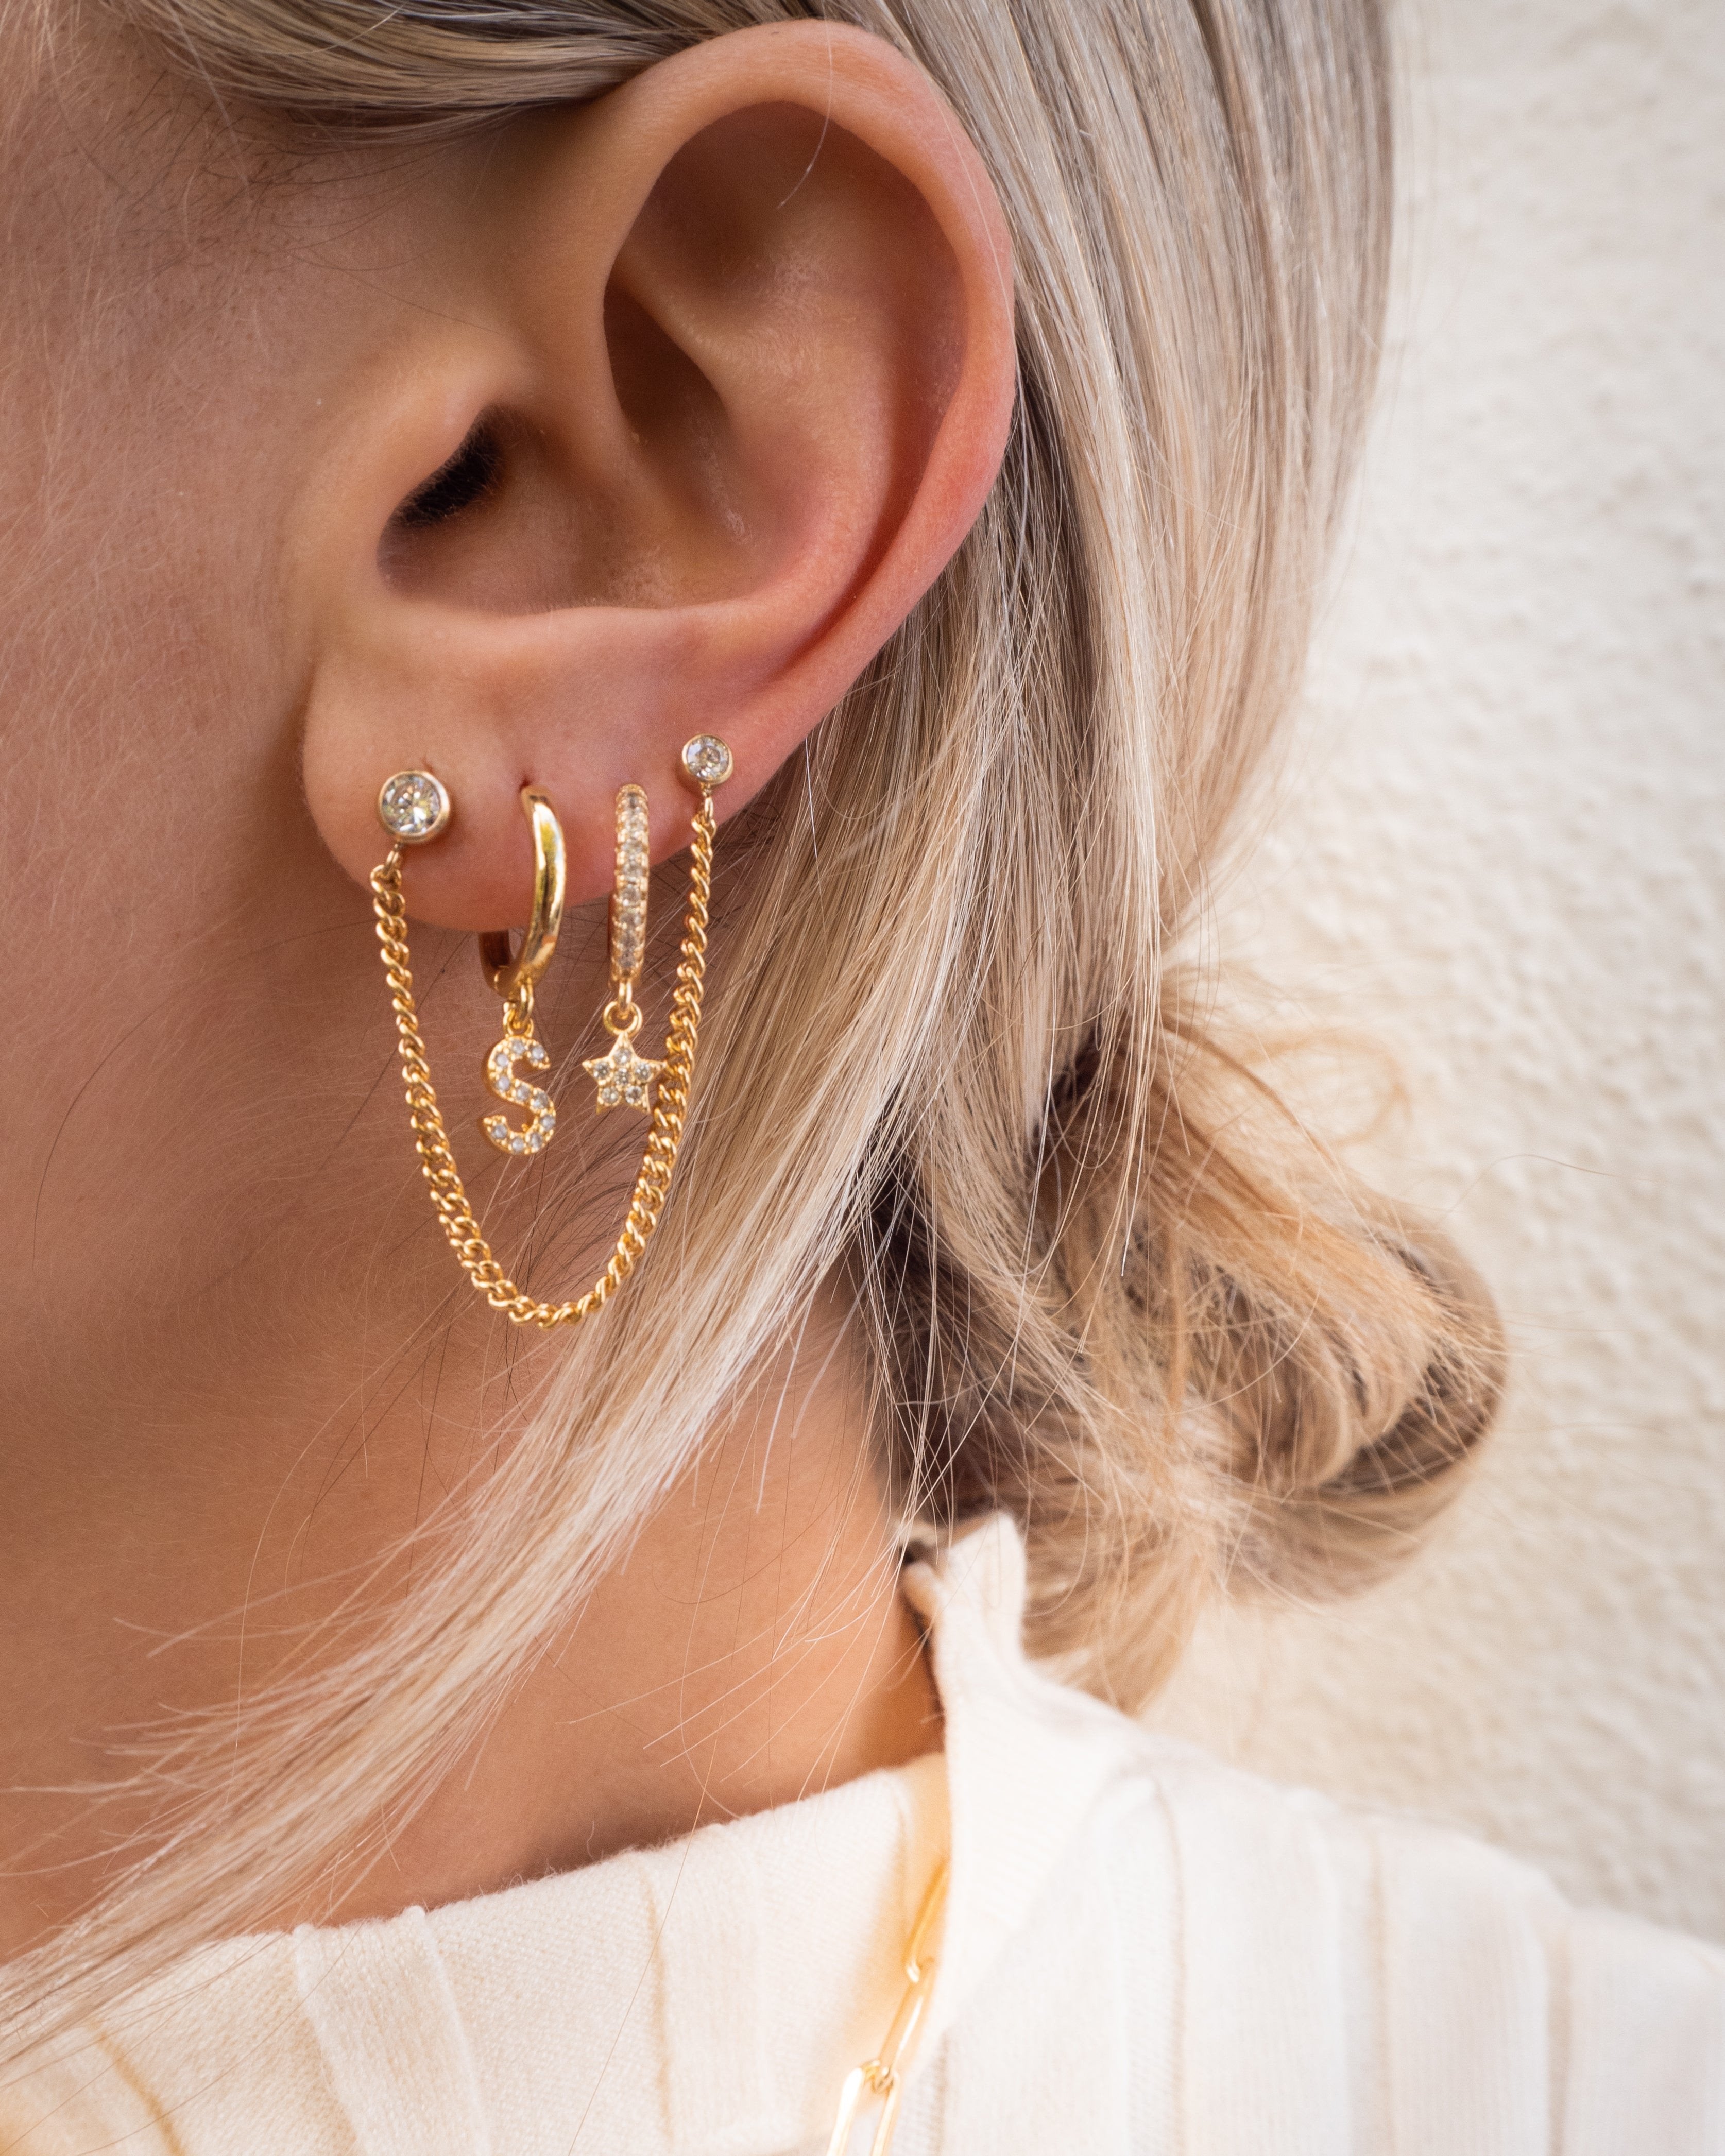 Buy Double Piercing Earring, Gold Chain Earrings, Double Chain Earrings,  Drop Earrings, Dangle Earrings, Stud Earring, Gold Filled Chain Earring  Online in India - Etsy